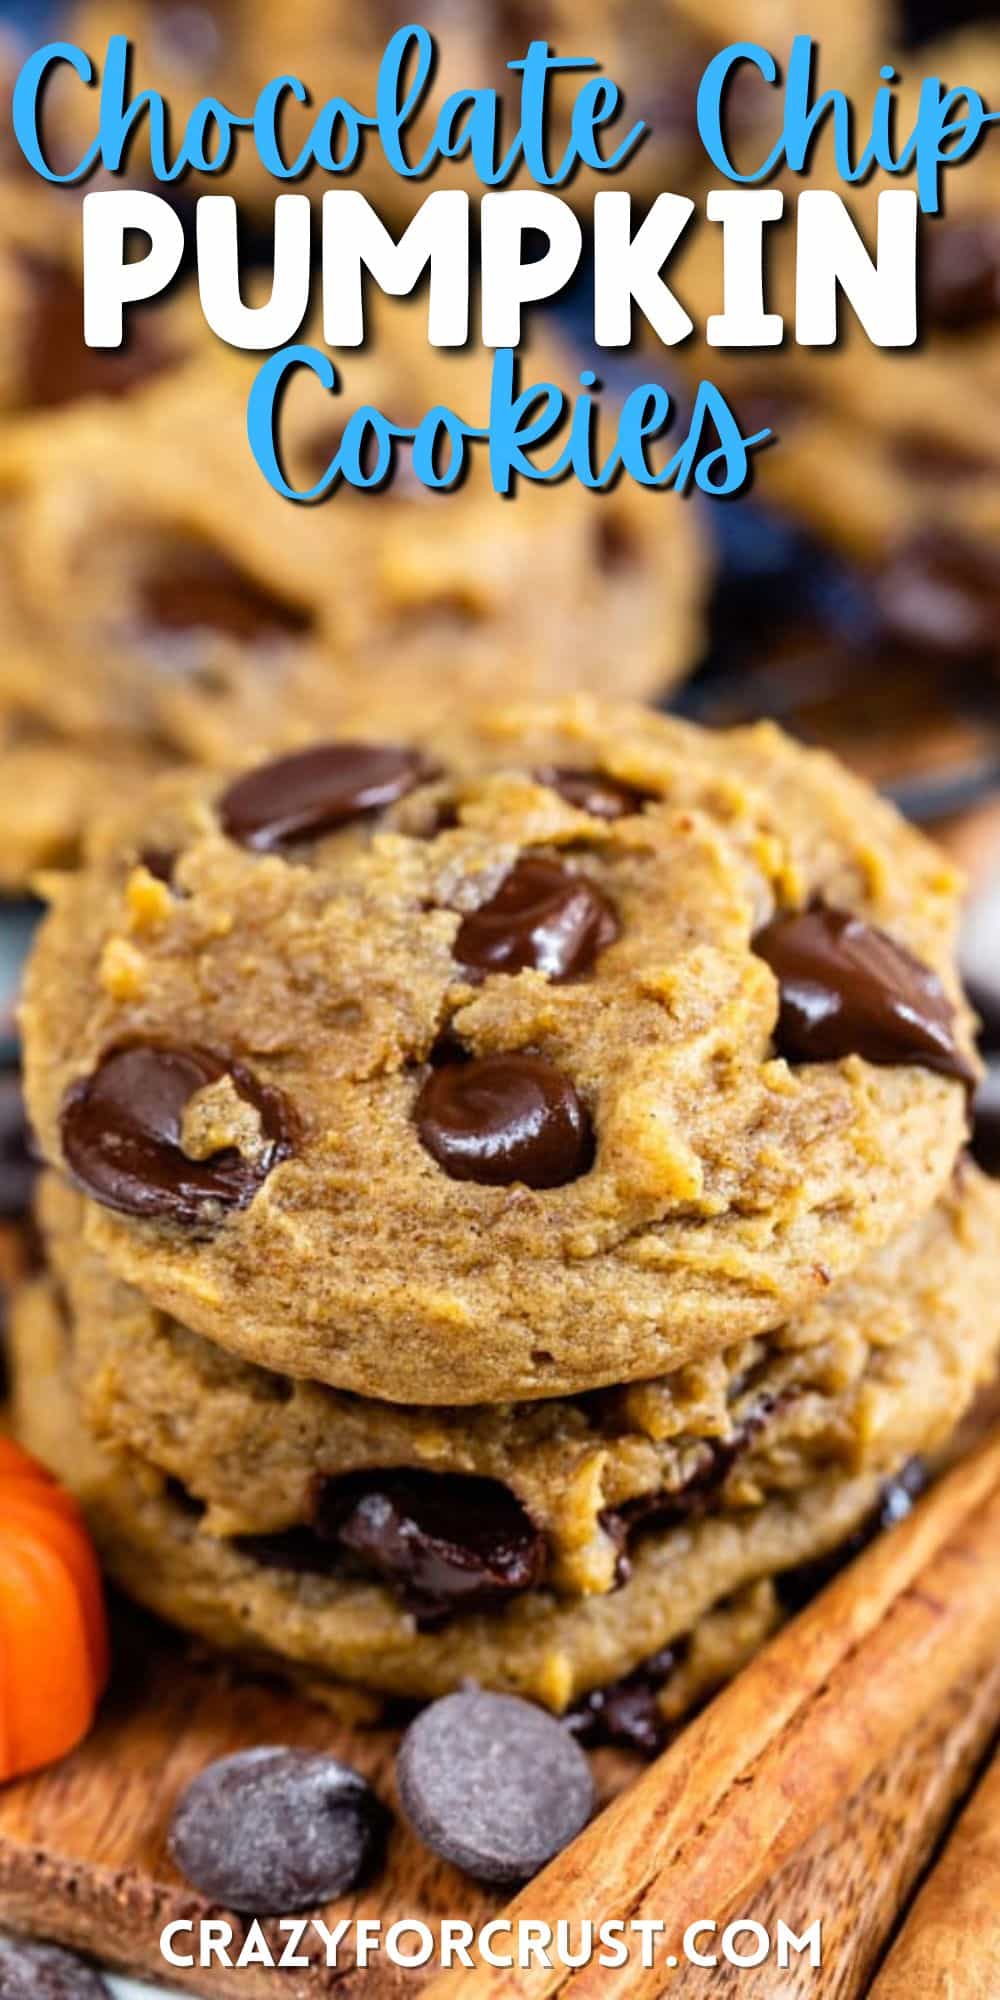 stacked pumpkin cookies with chocolate chips baked in and words on top